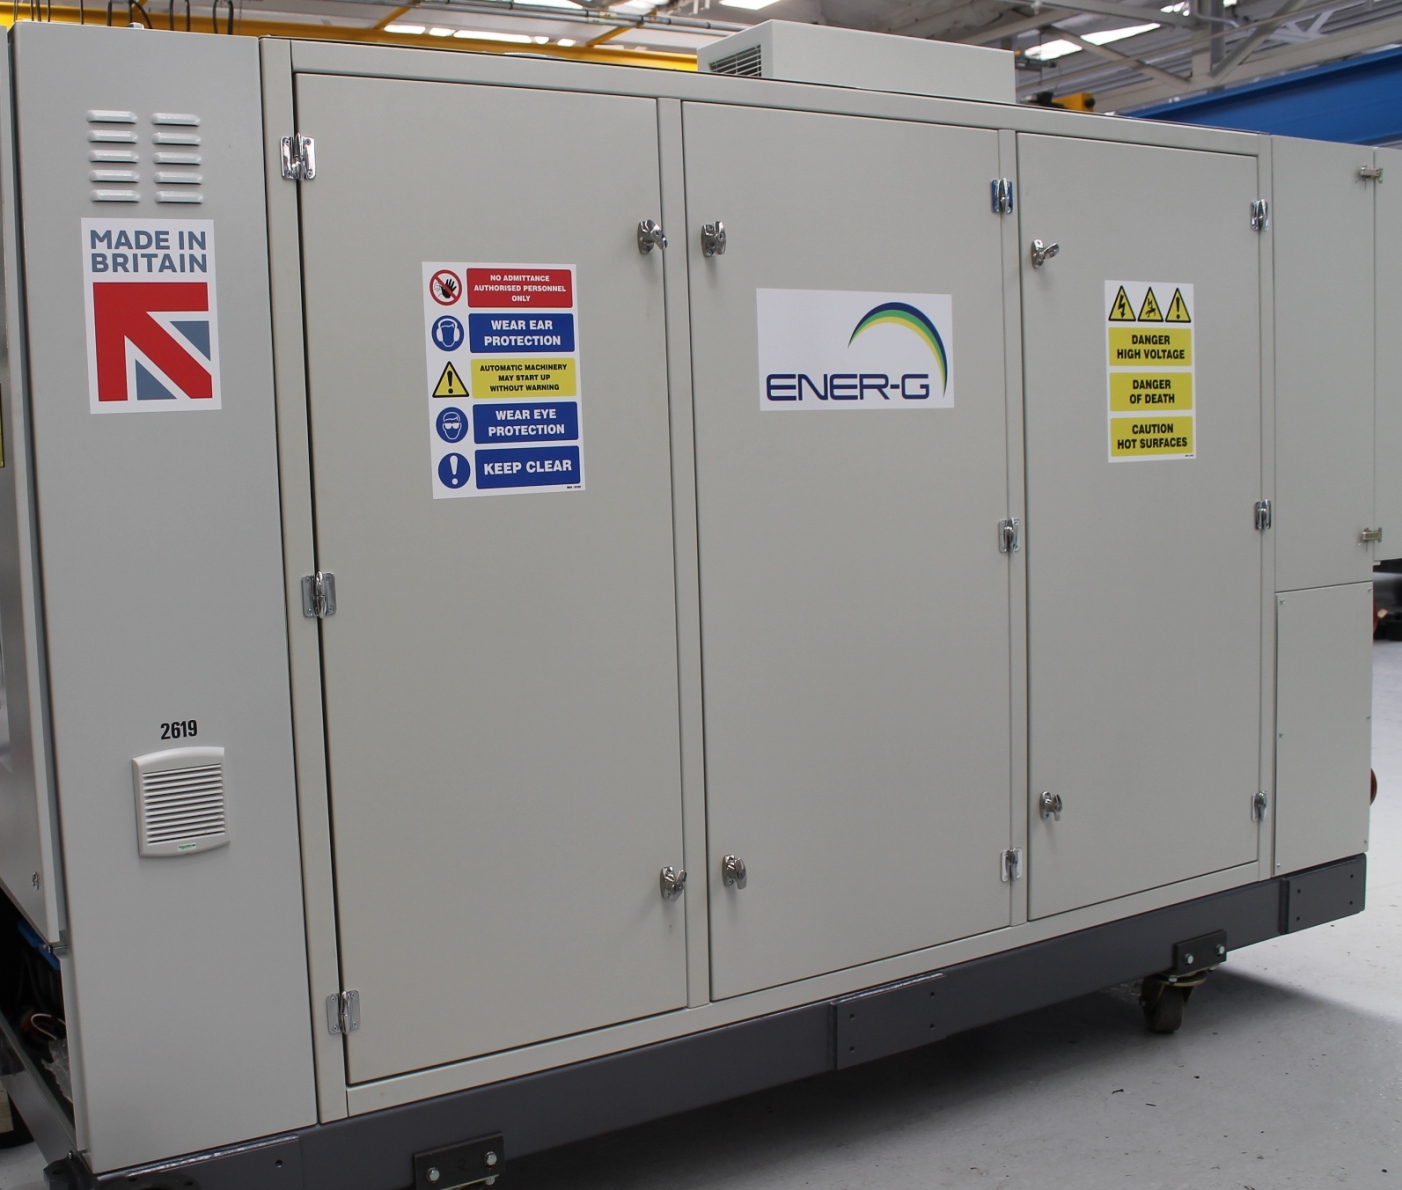 New ENER-G E-200 biogas CHP unit will increase ROI on small scale anaerobic digestion